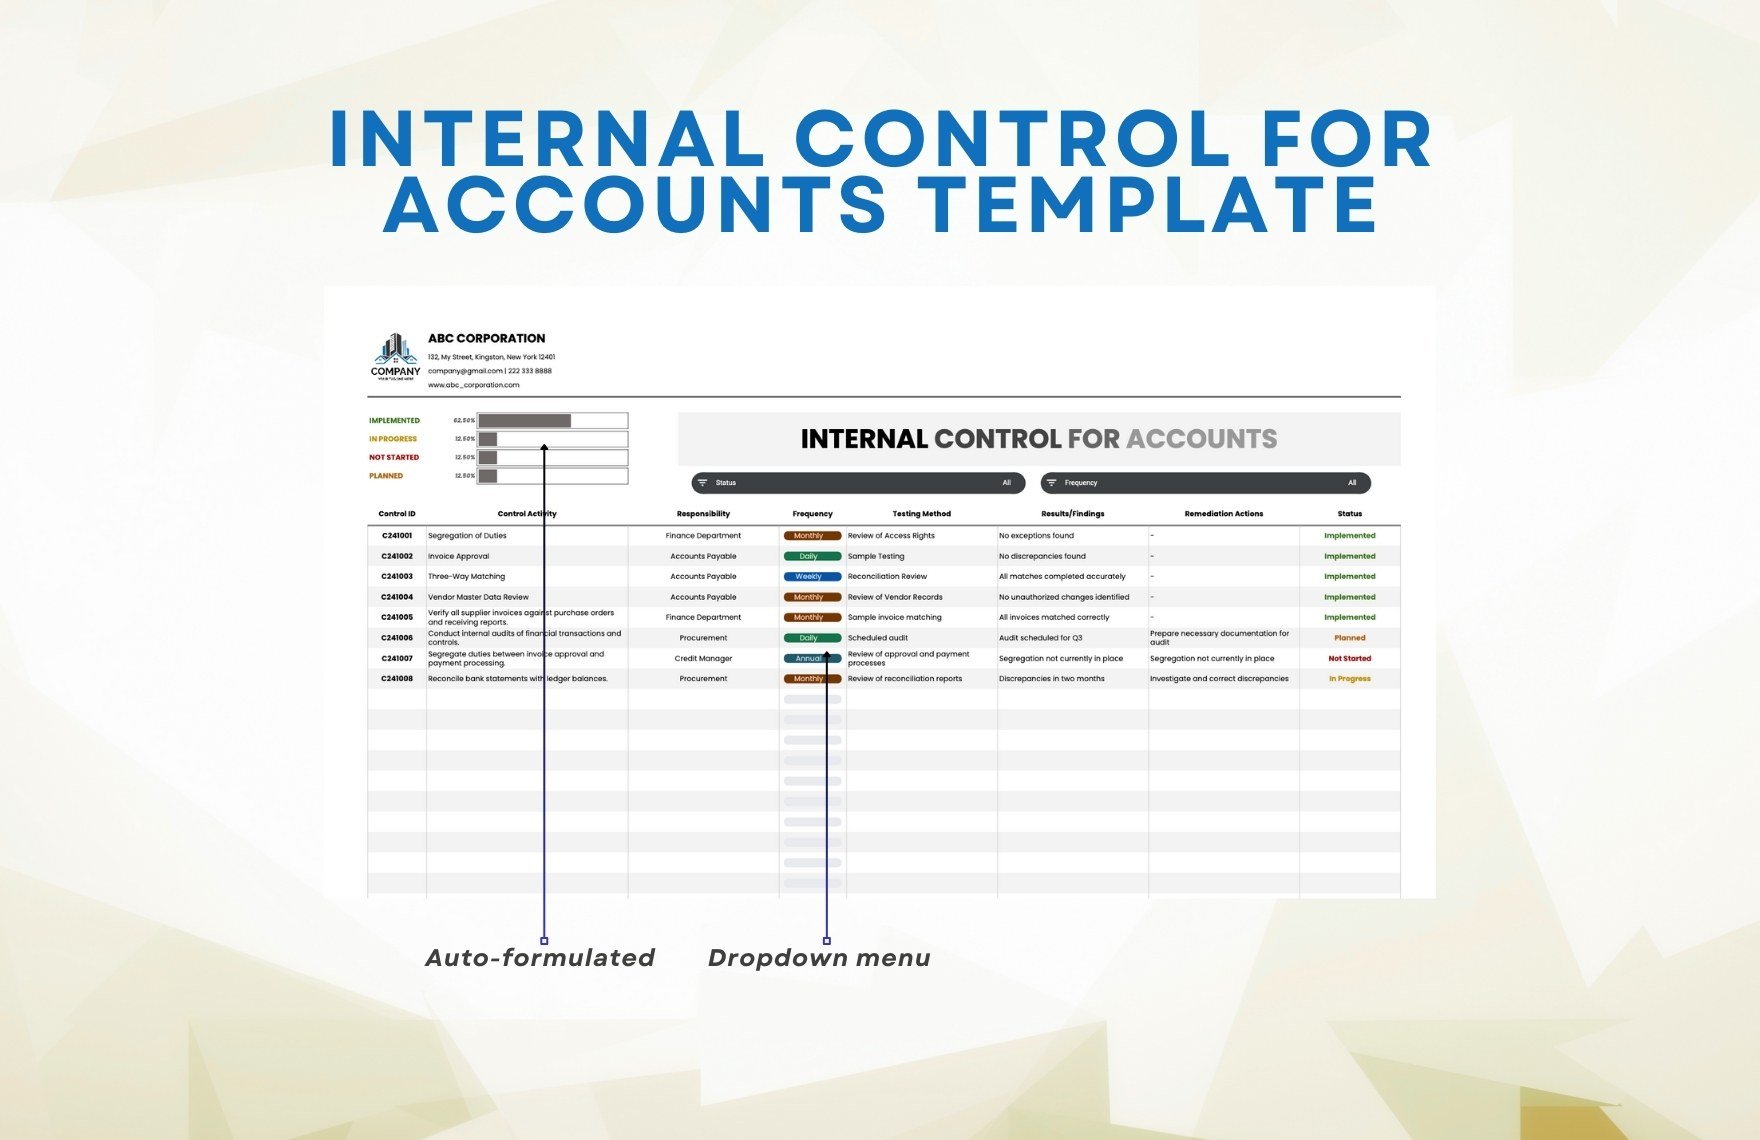 Internal Control for Accounts Template